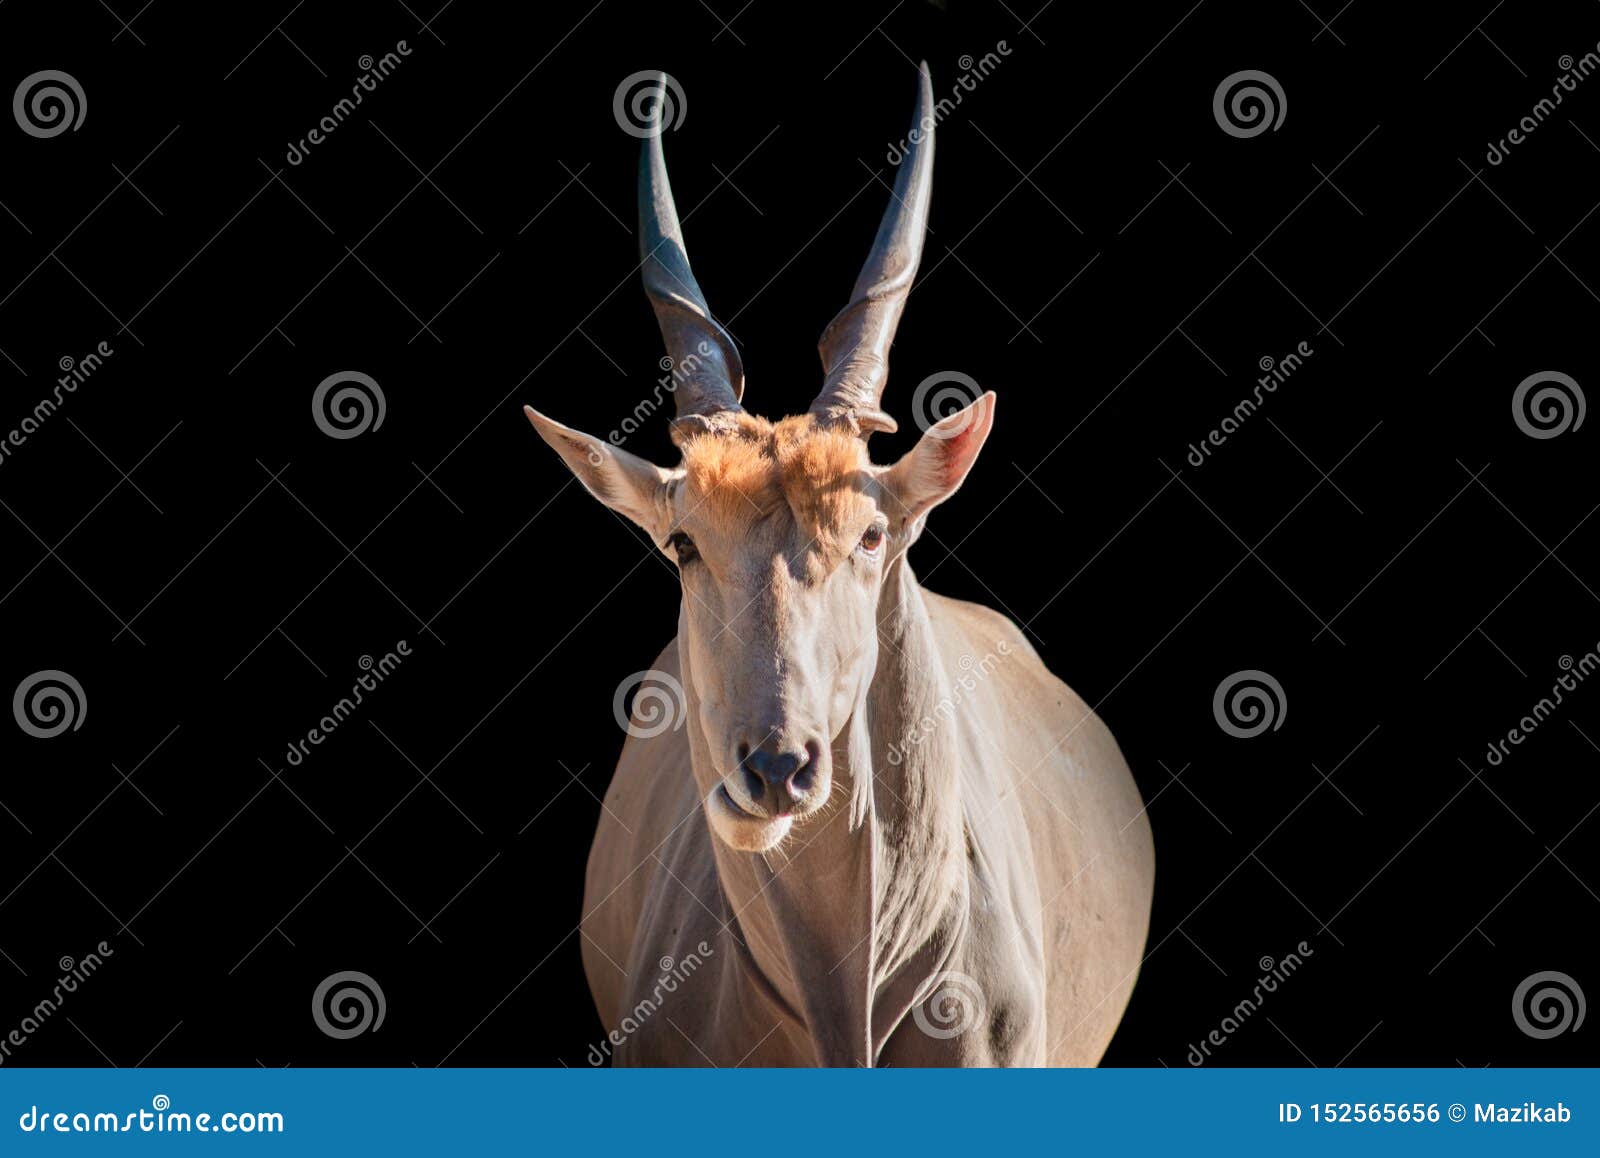 Single horned large african animals